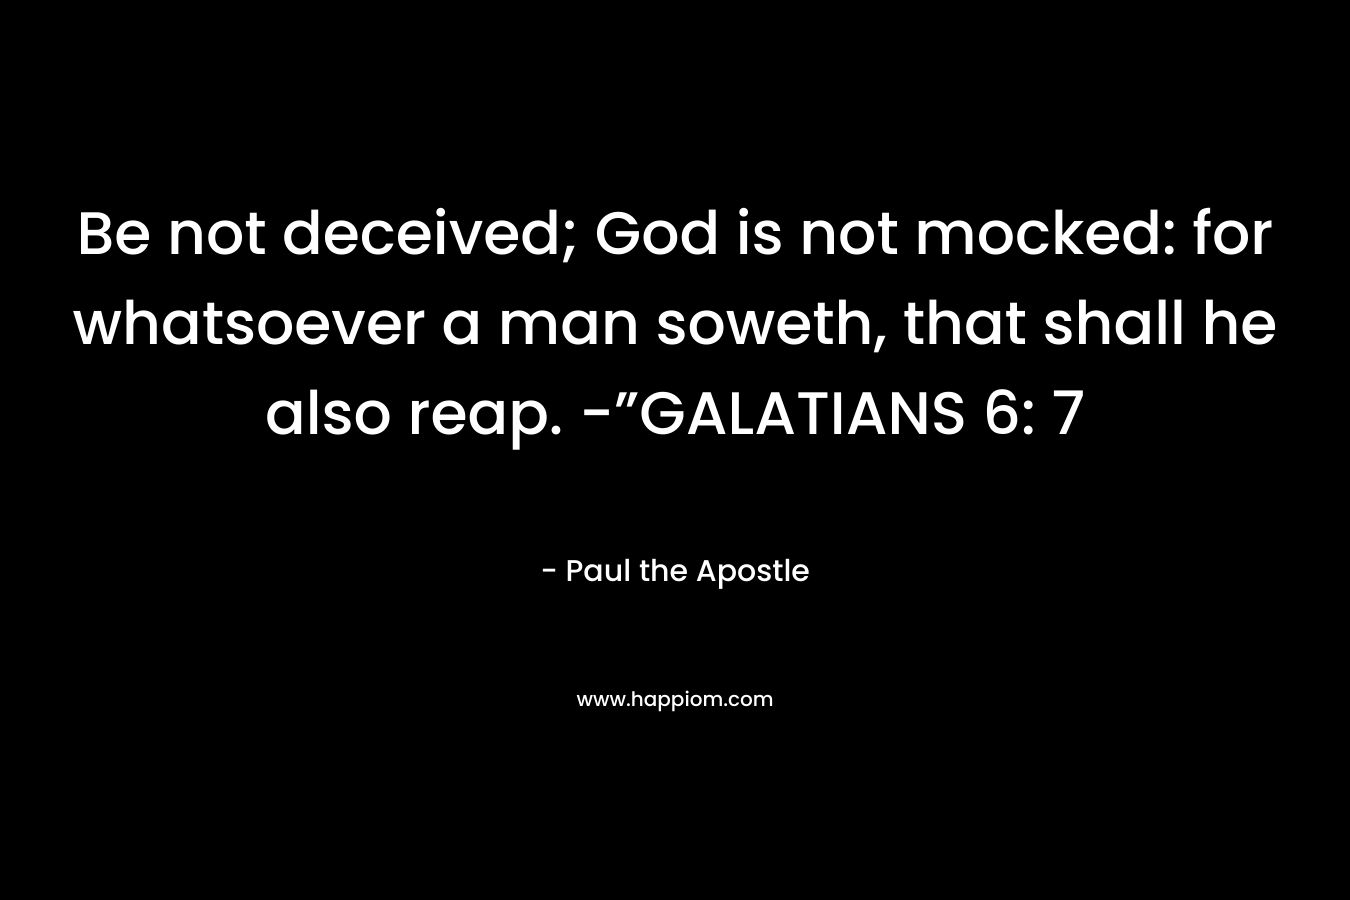 Be not deceived; God is not mocked: for whatsoever a man soweth, that shall he also reap. -”GALATIANS 6: 7